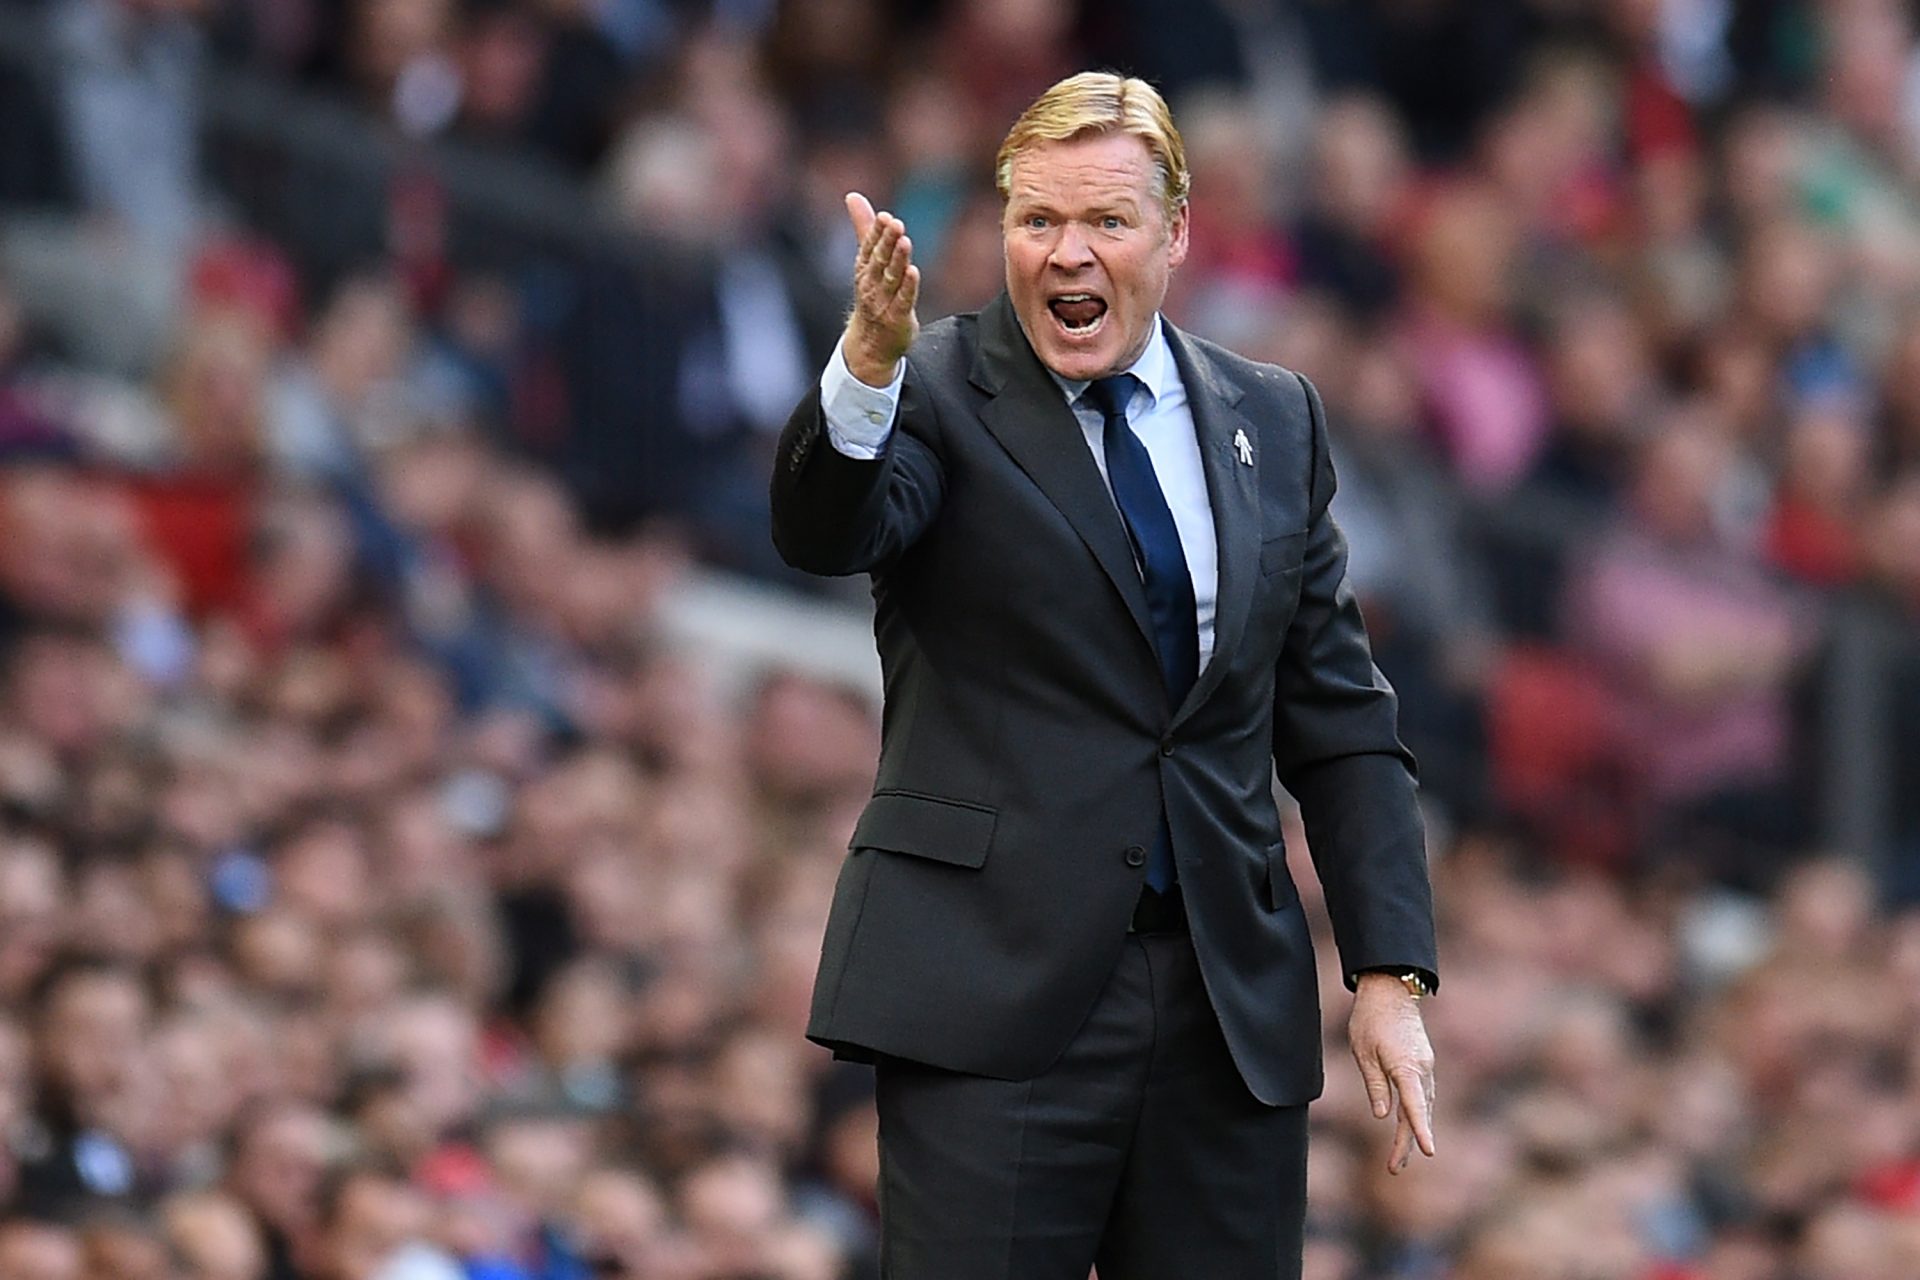 Can Ronald Koeman do it as a manager and hand the Netherlands another European title?